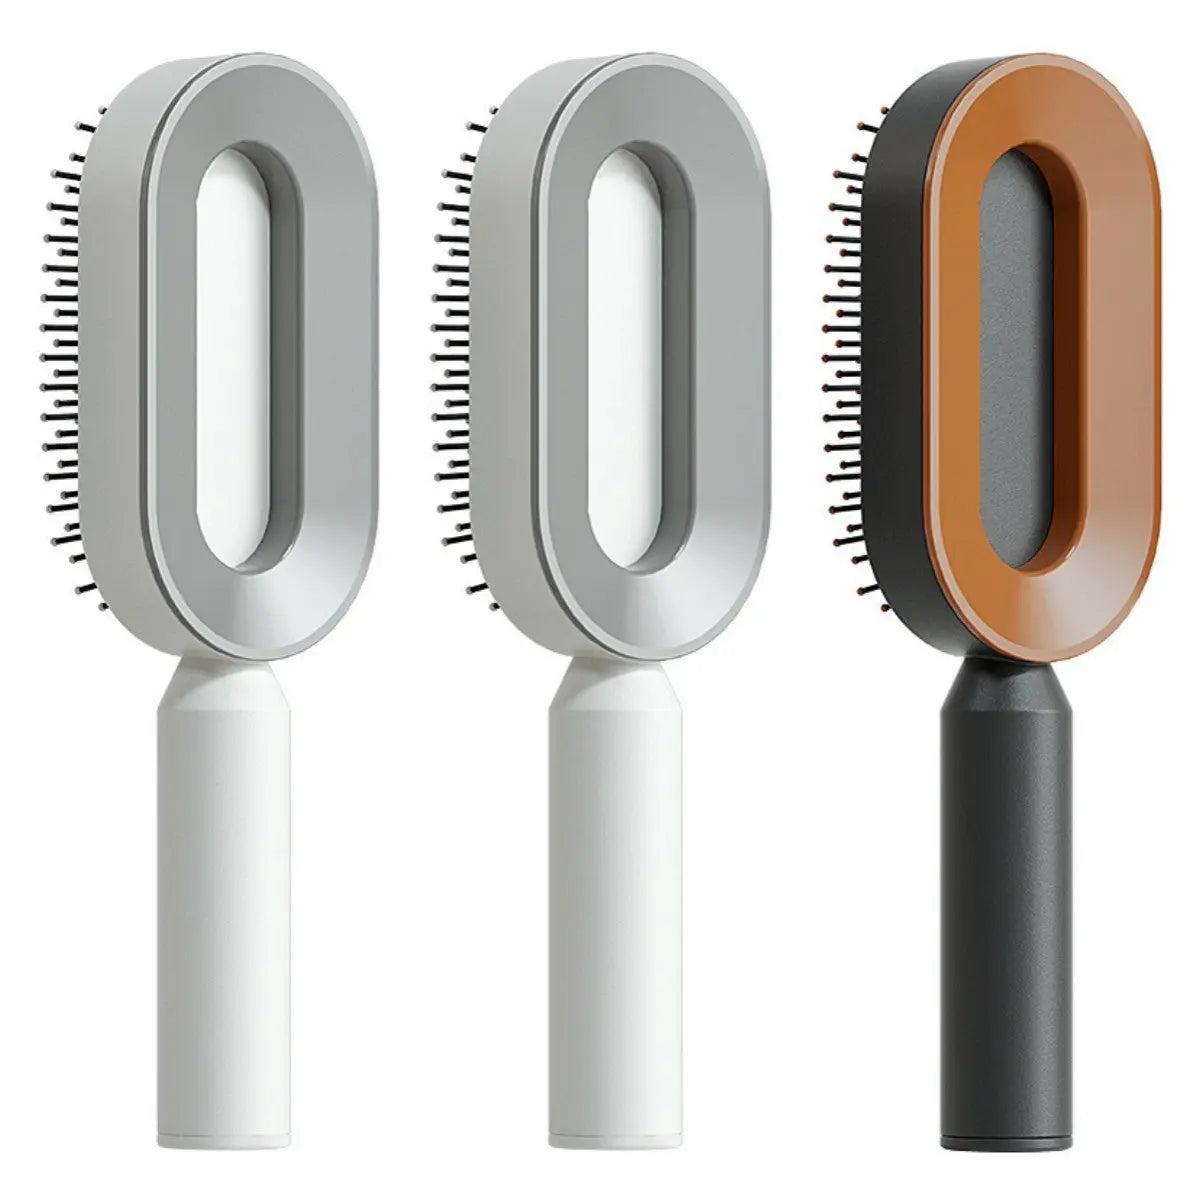 Self Cleaning Hair Brush For Women One-key Cleaning Hair Loss Airbag Massage Scalp Comb Anti-Static Hairbrush - Trending's Arena Beauty Self Cleaning Hair Brush For Women One-key Cleaning Hair Loss Airbag Massage Scalp Comb Anti-Static Hairbrush FACE Set-V